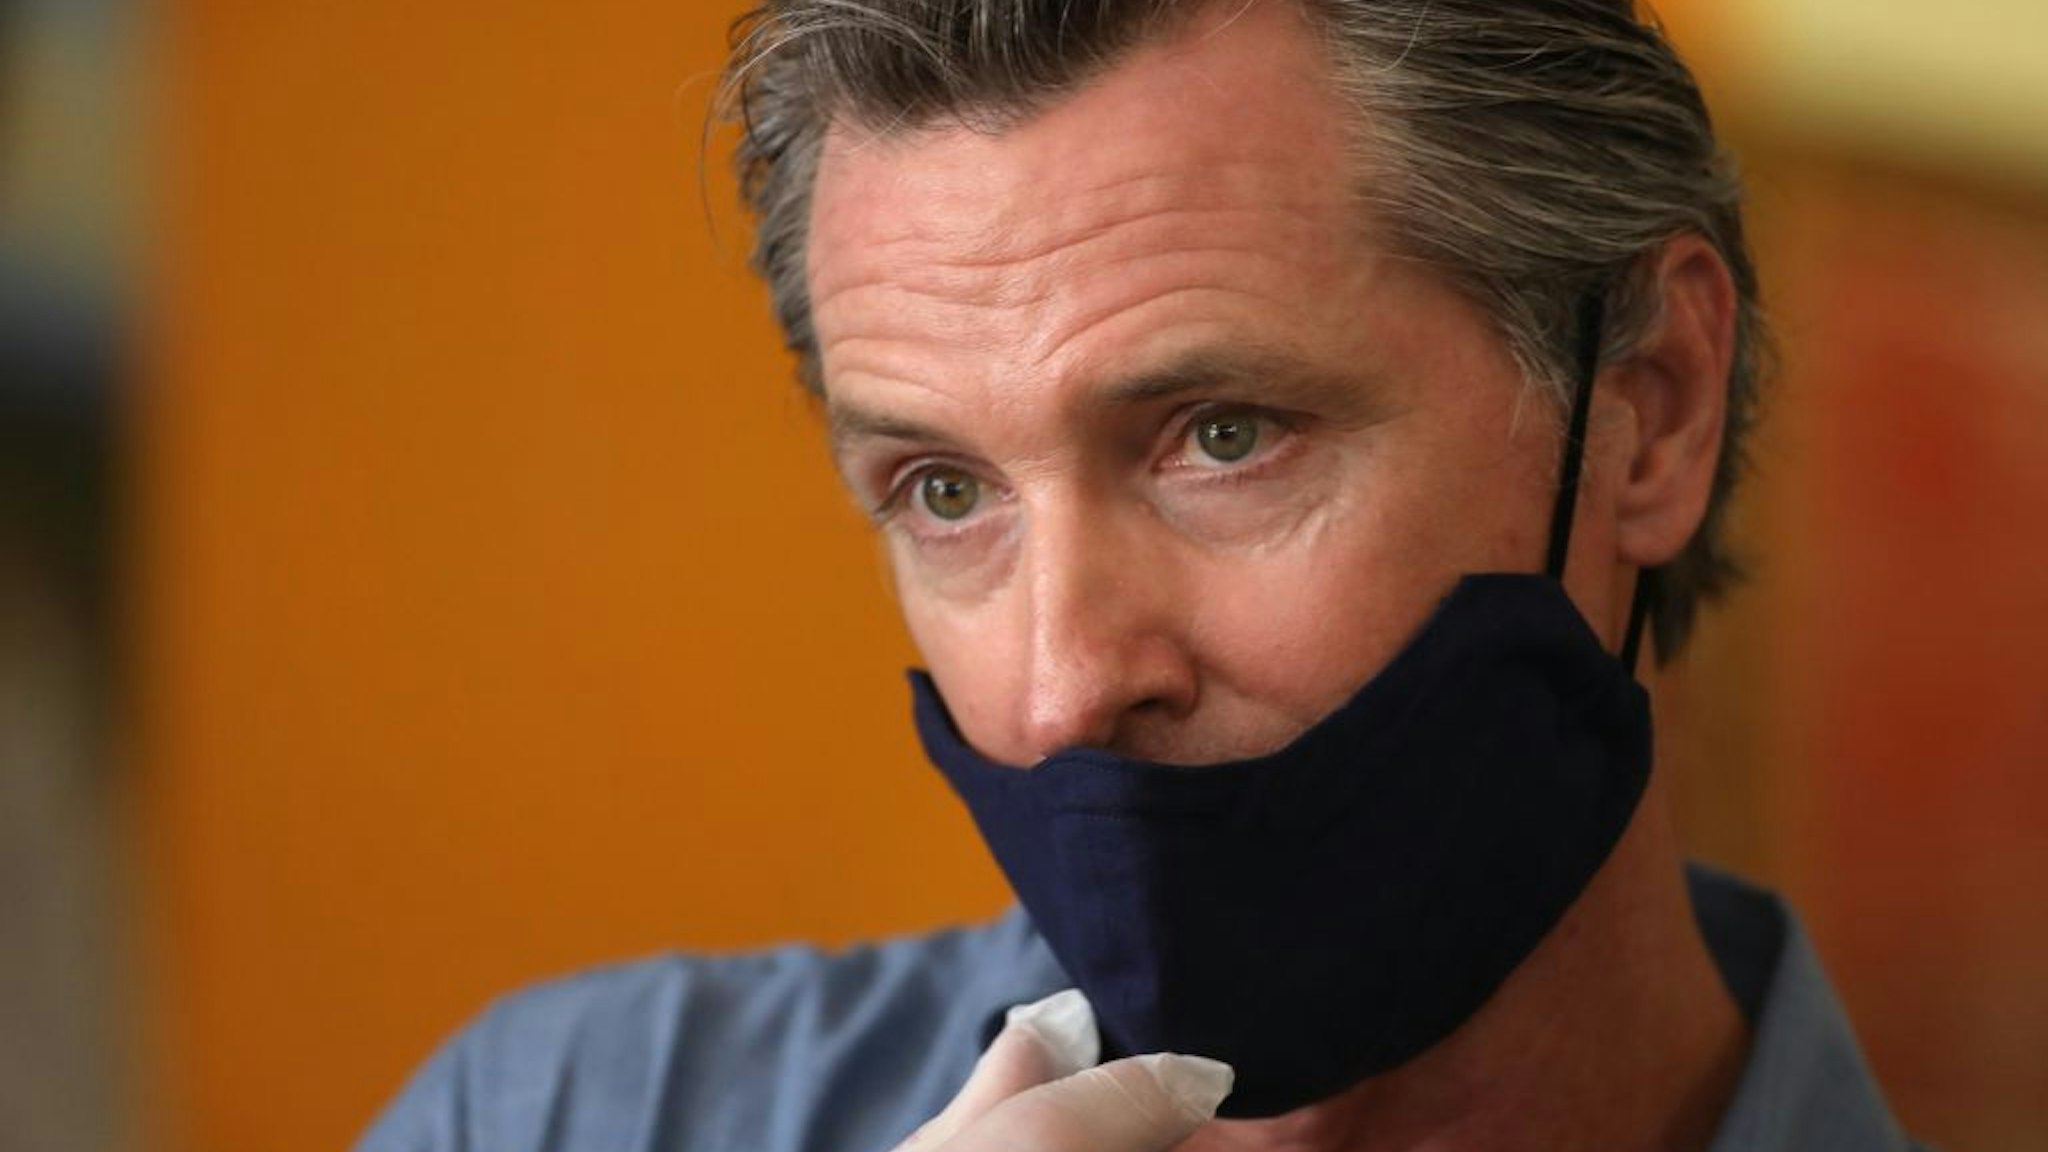 LOS ANGELES, CA - JUNE 03, 2020 - - California Governor Gavin Newsom is interviewed while visiting the Hot and Cool Cafe in Leimert Park after several days of protest in Los Angeles on June 3, 2020.